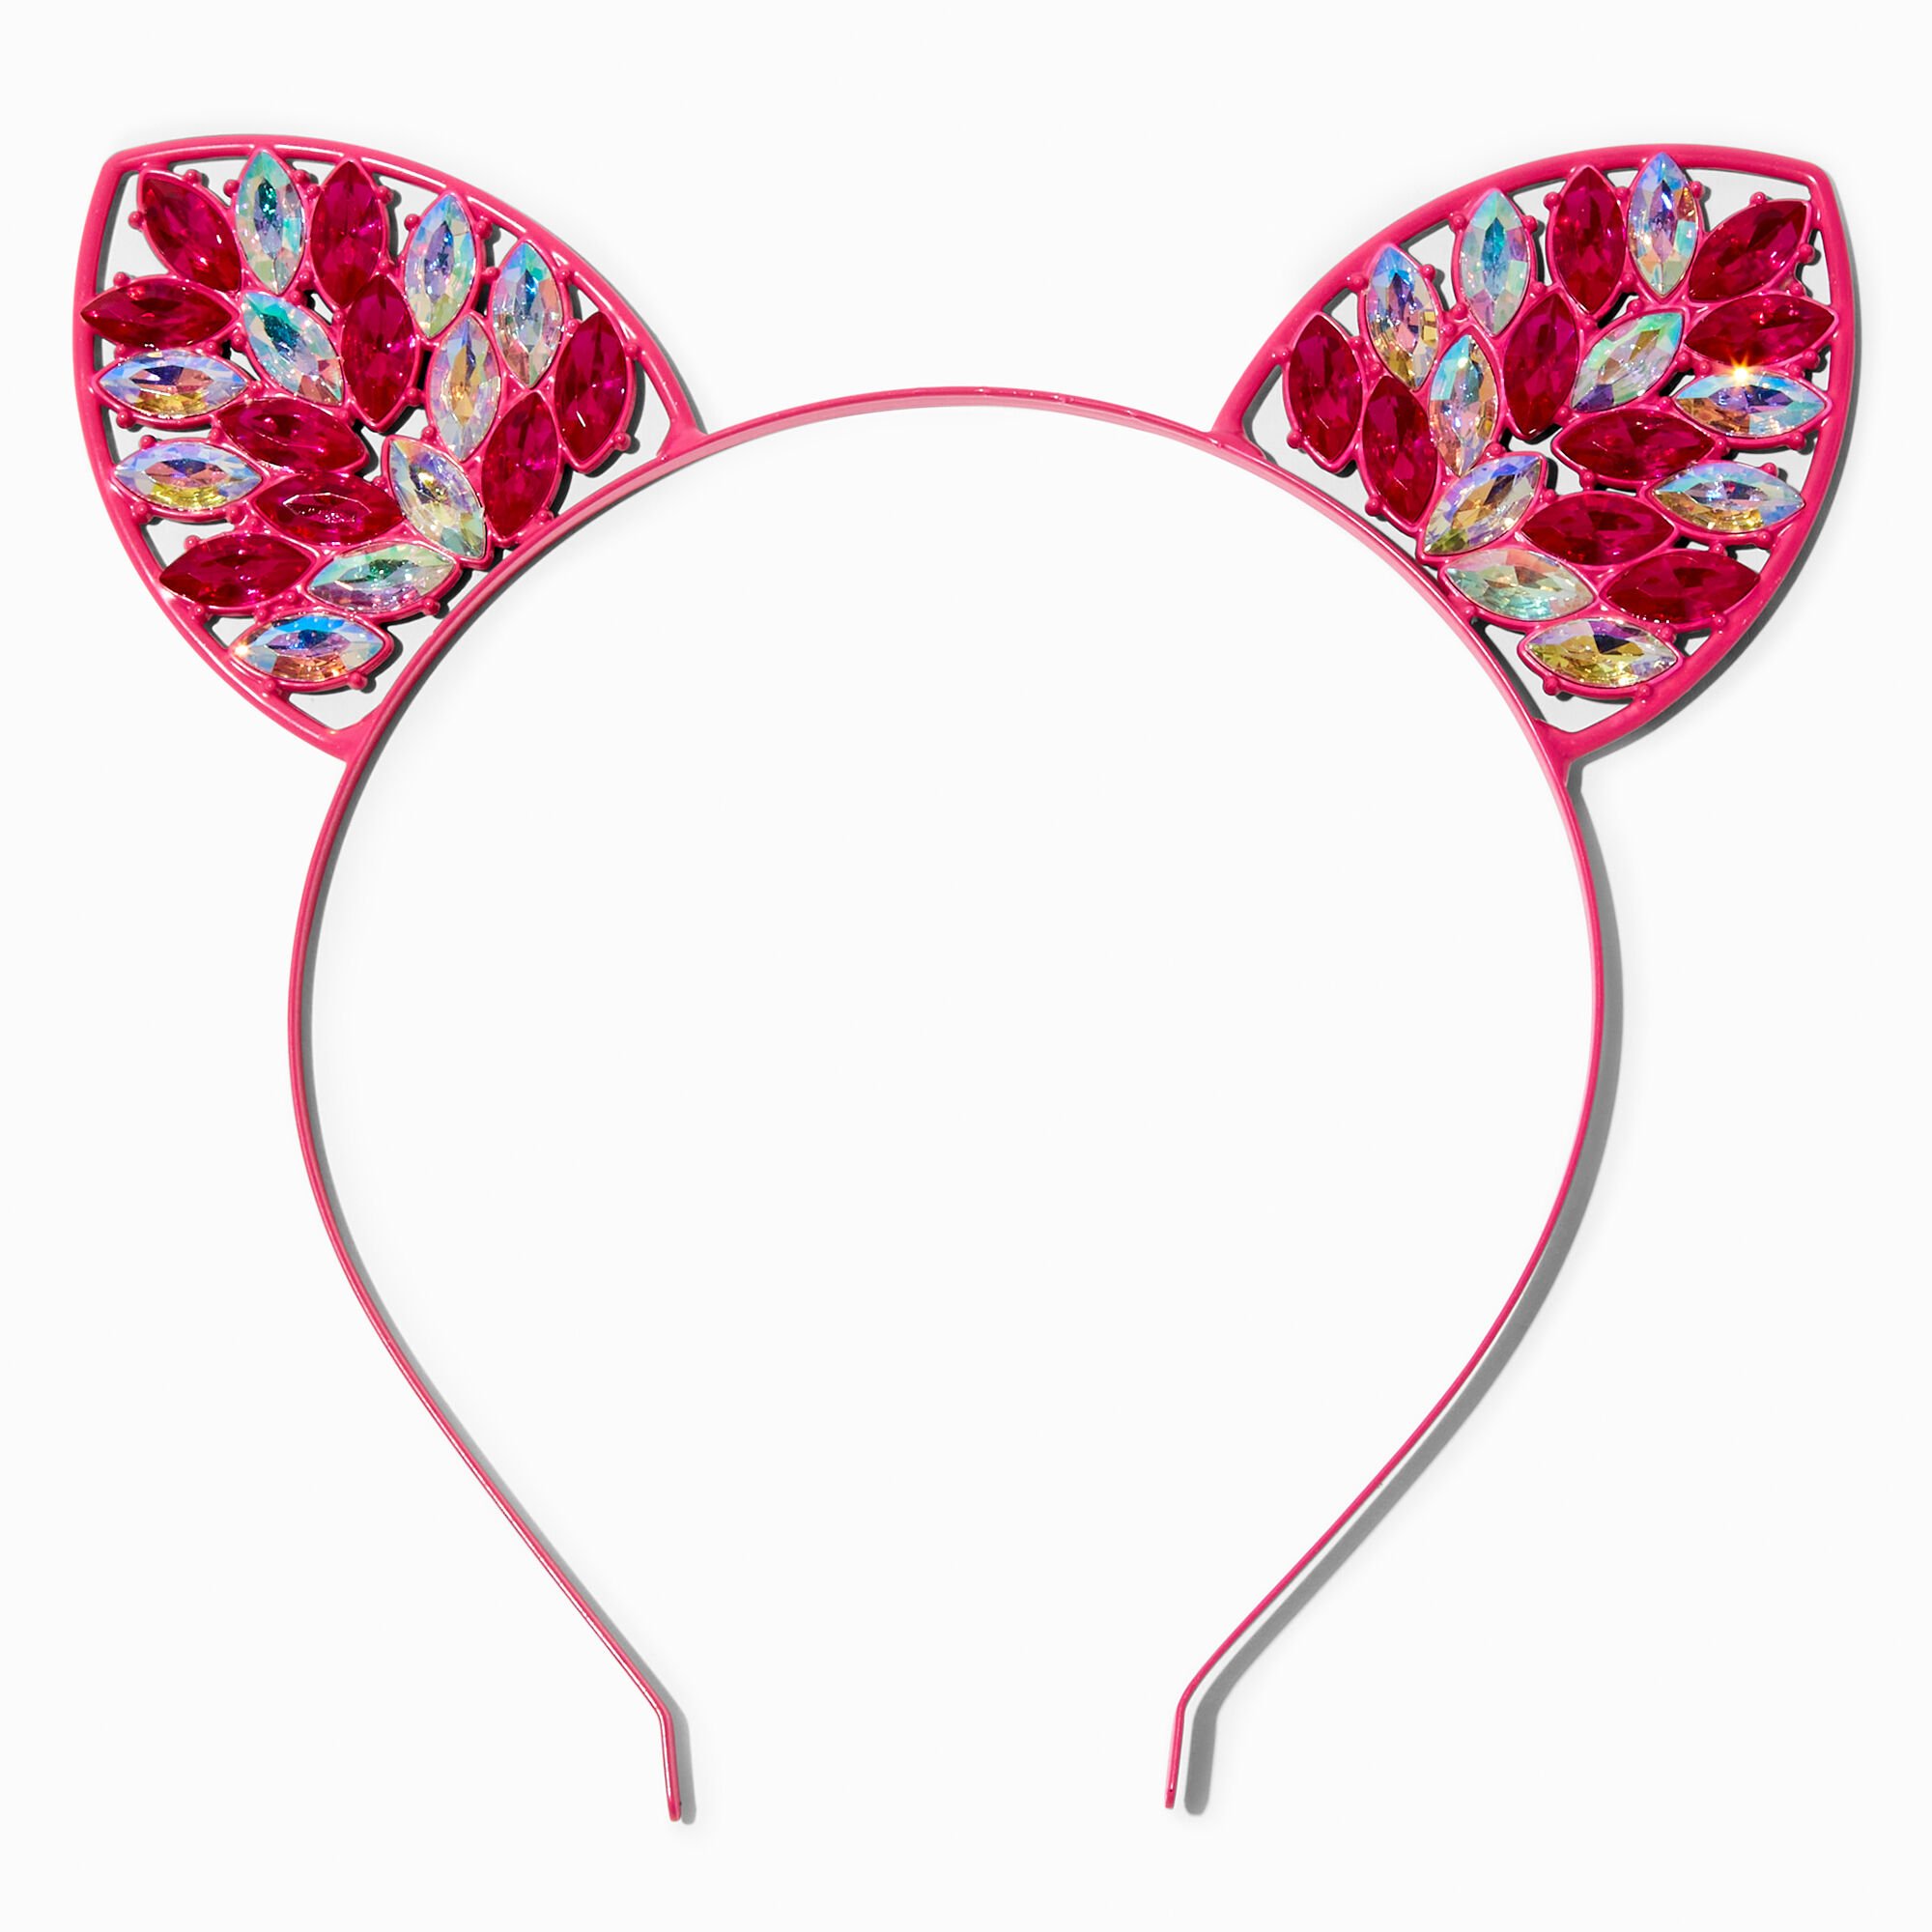 View Claires Gemstone Cat Ears Headband Pink information